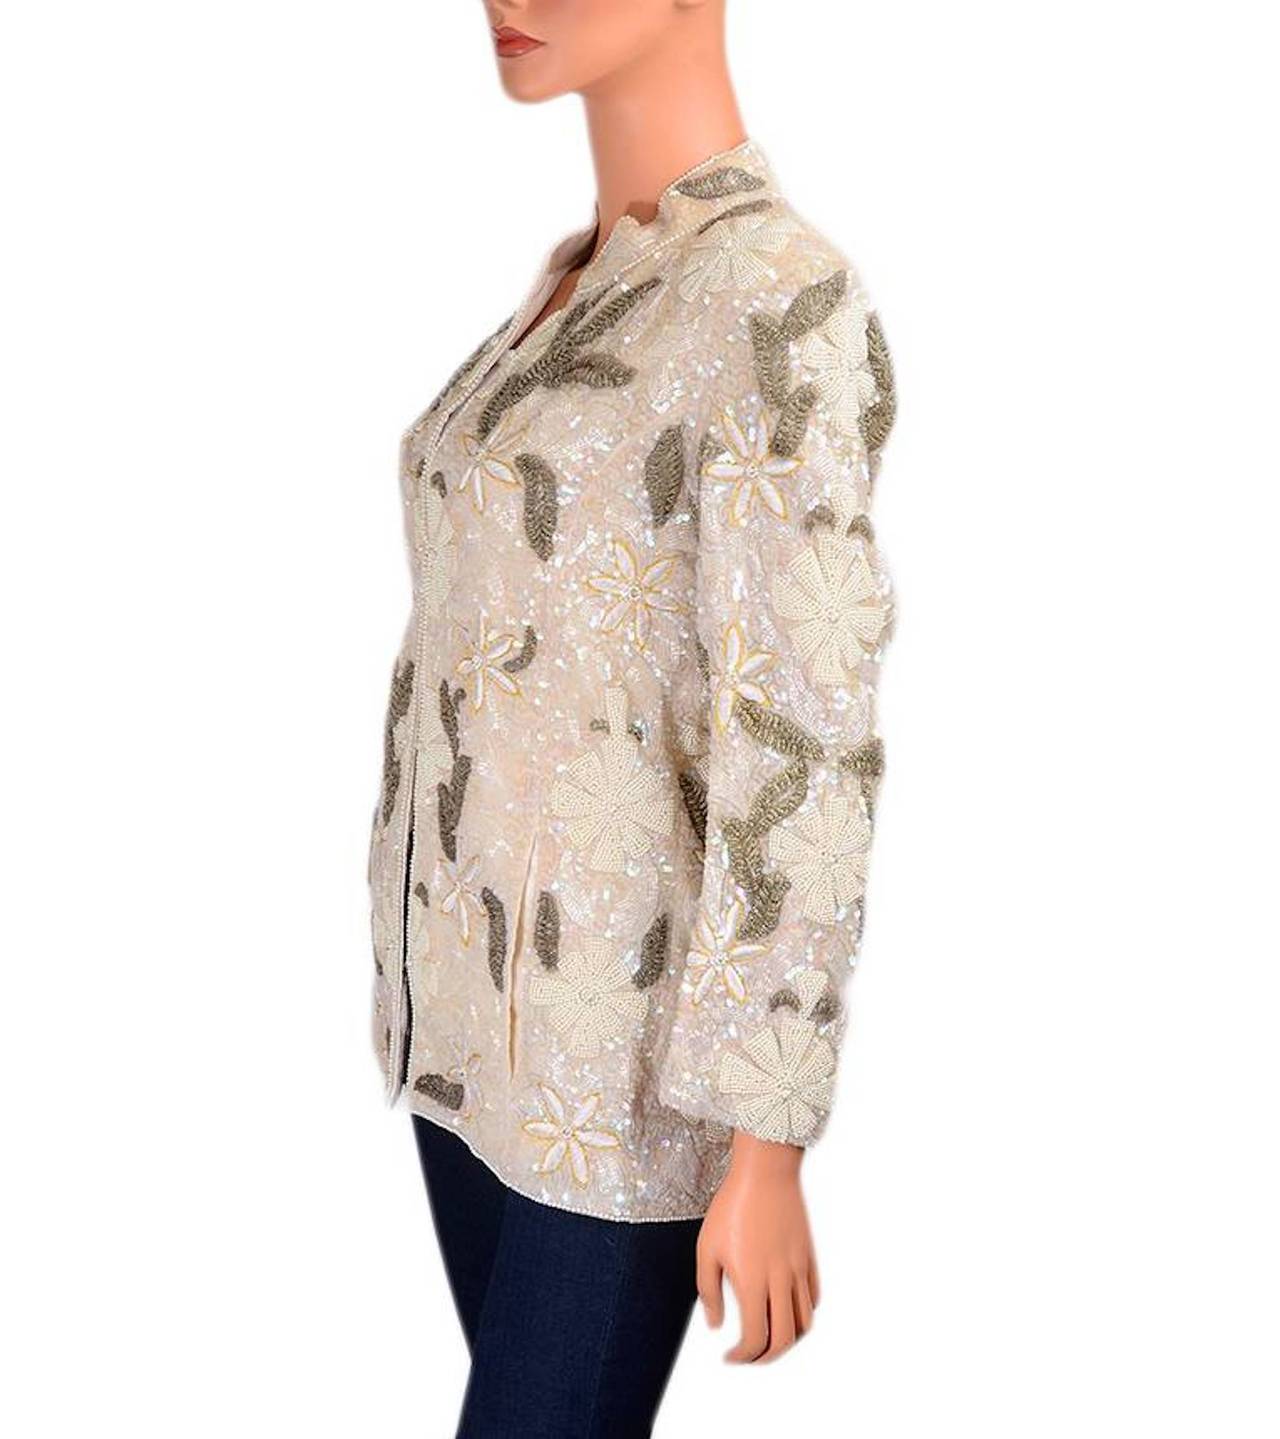 Loris Azzaro circa 1980s silk pearl iridescent and gold beaded jacket with cream embroidery, hook and eye closure, long sleeves, and silk lining.  A beautiful piece of wearable art.
 
Fabric Content: 100% silk; lining: 100% silk
 
Origin: France